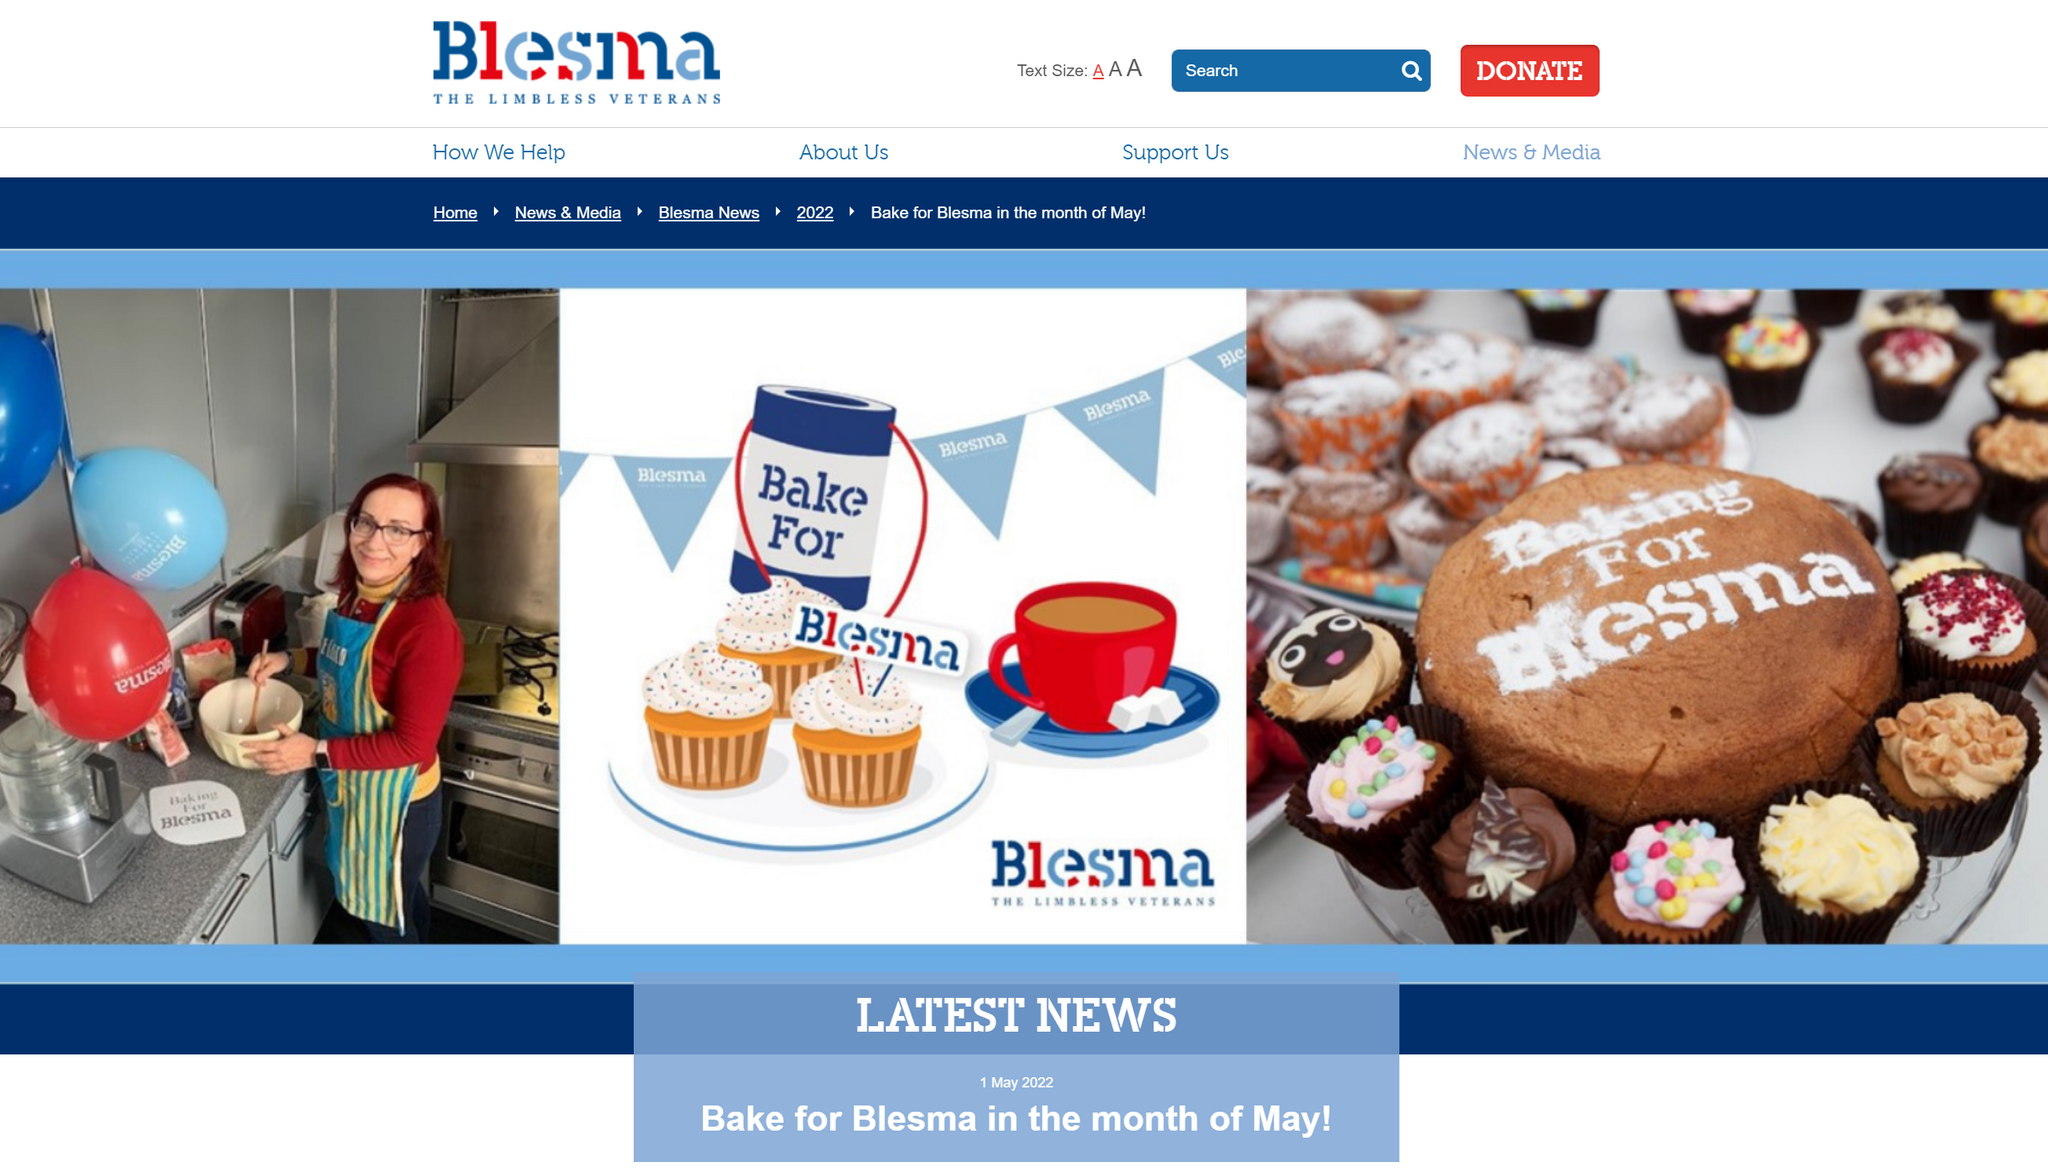 Bake for Blesma in May and help support our injured veterans!